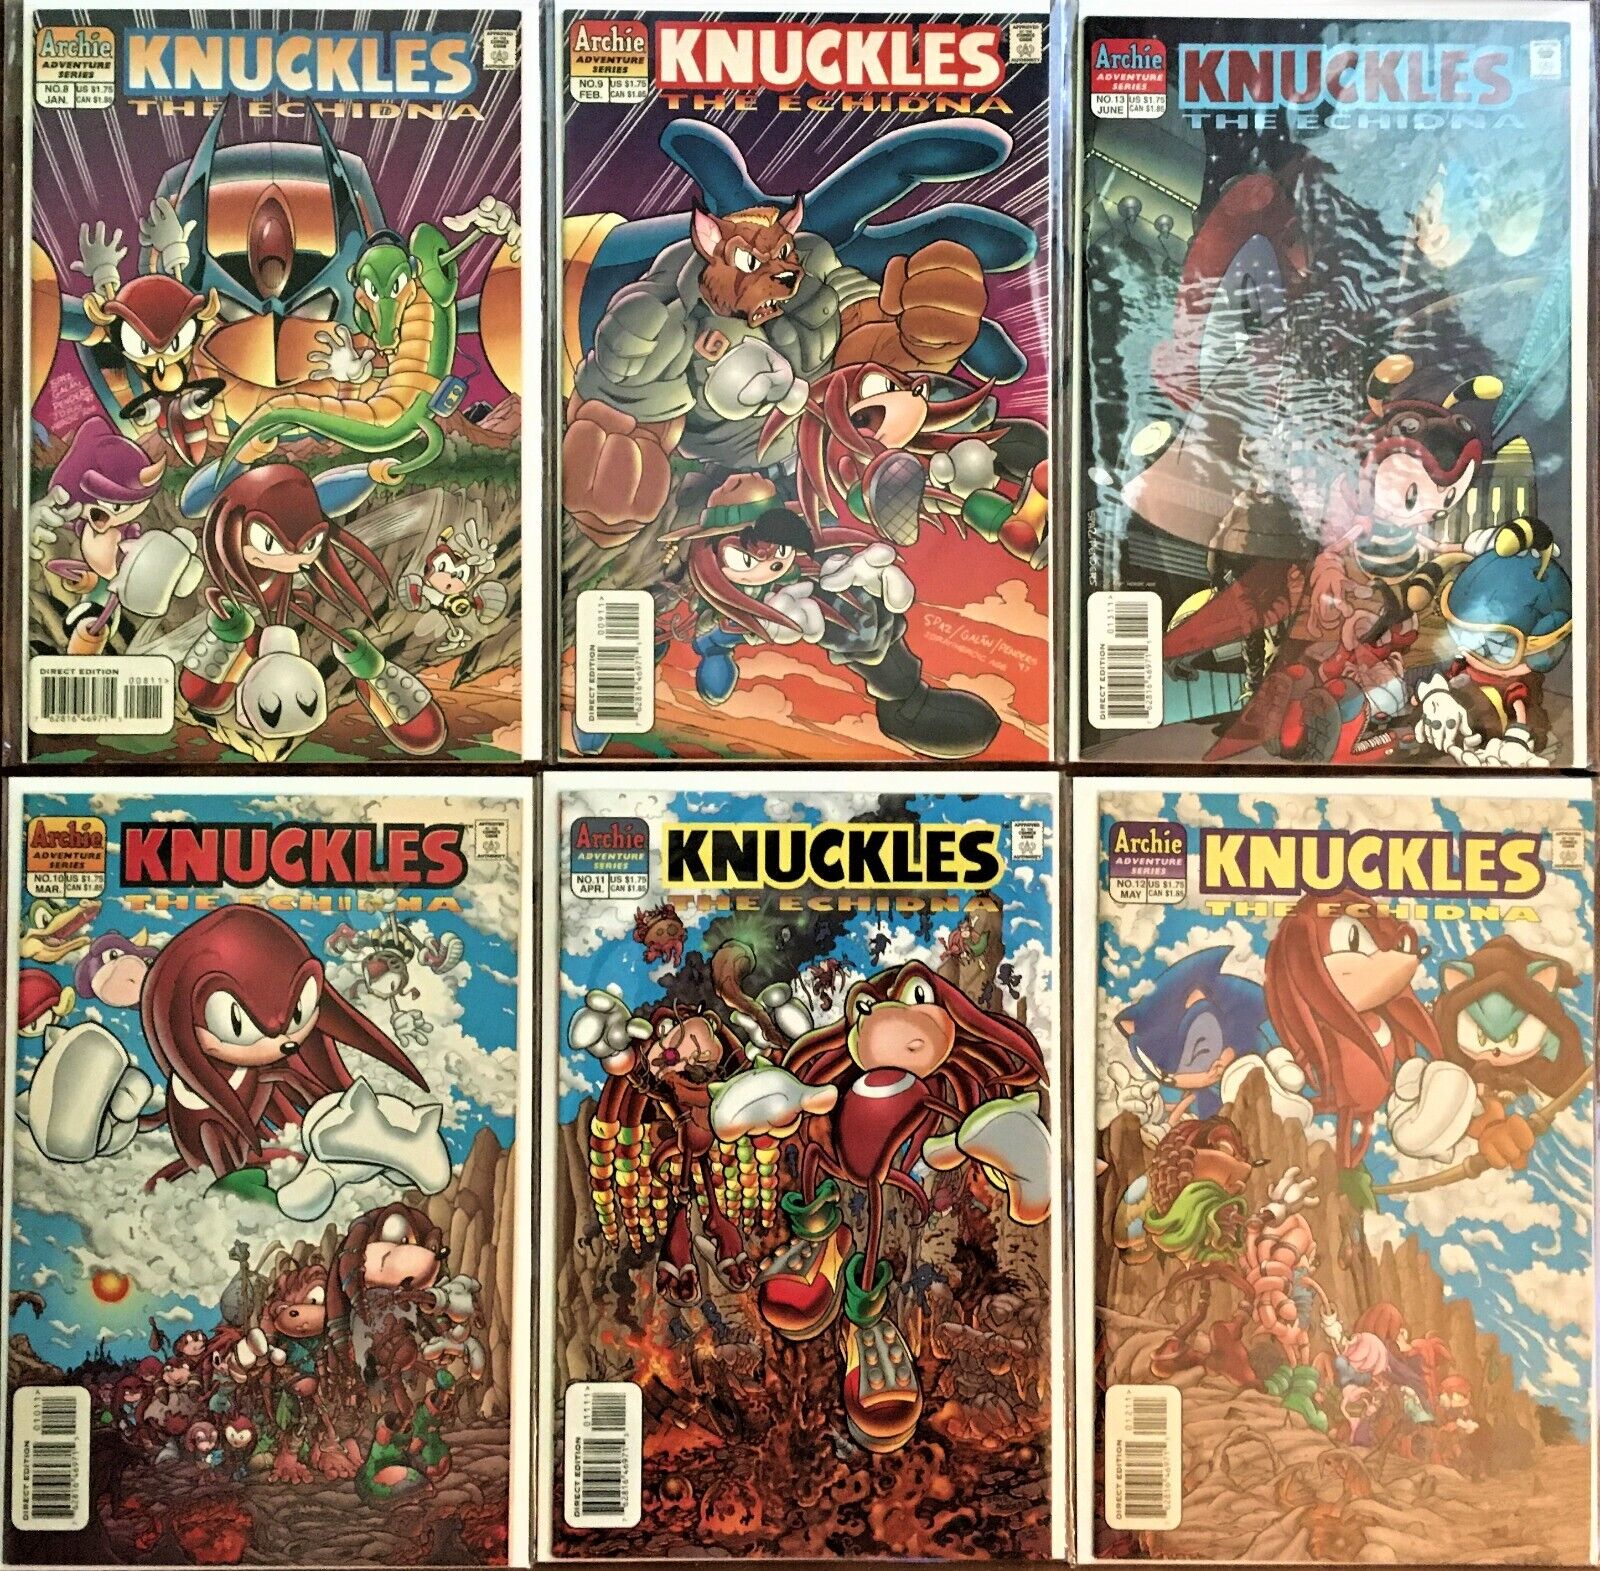 LOT 334:  KNUCKLES Echidna Comic Books #8-13 ~ 1998 Set Bagged & Boarded VF-/GD